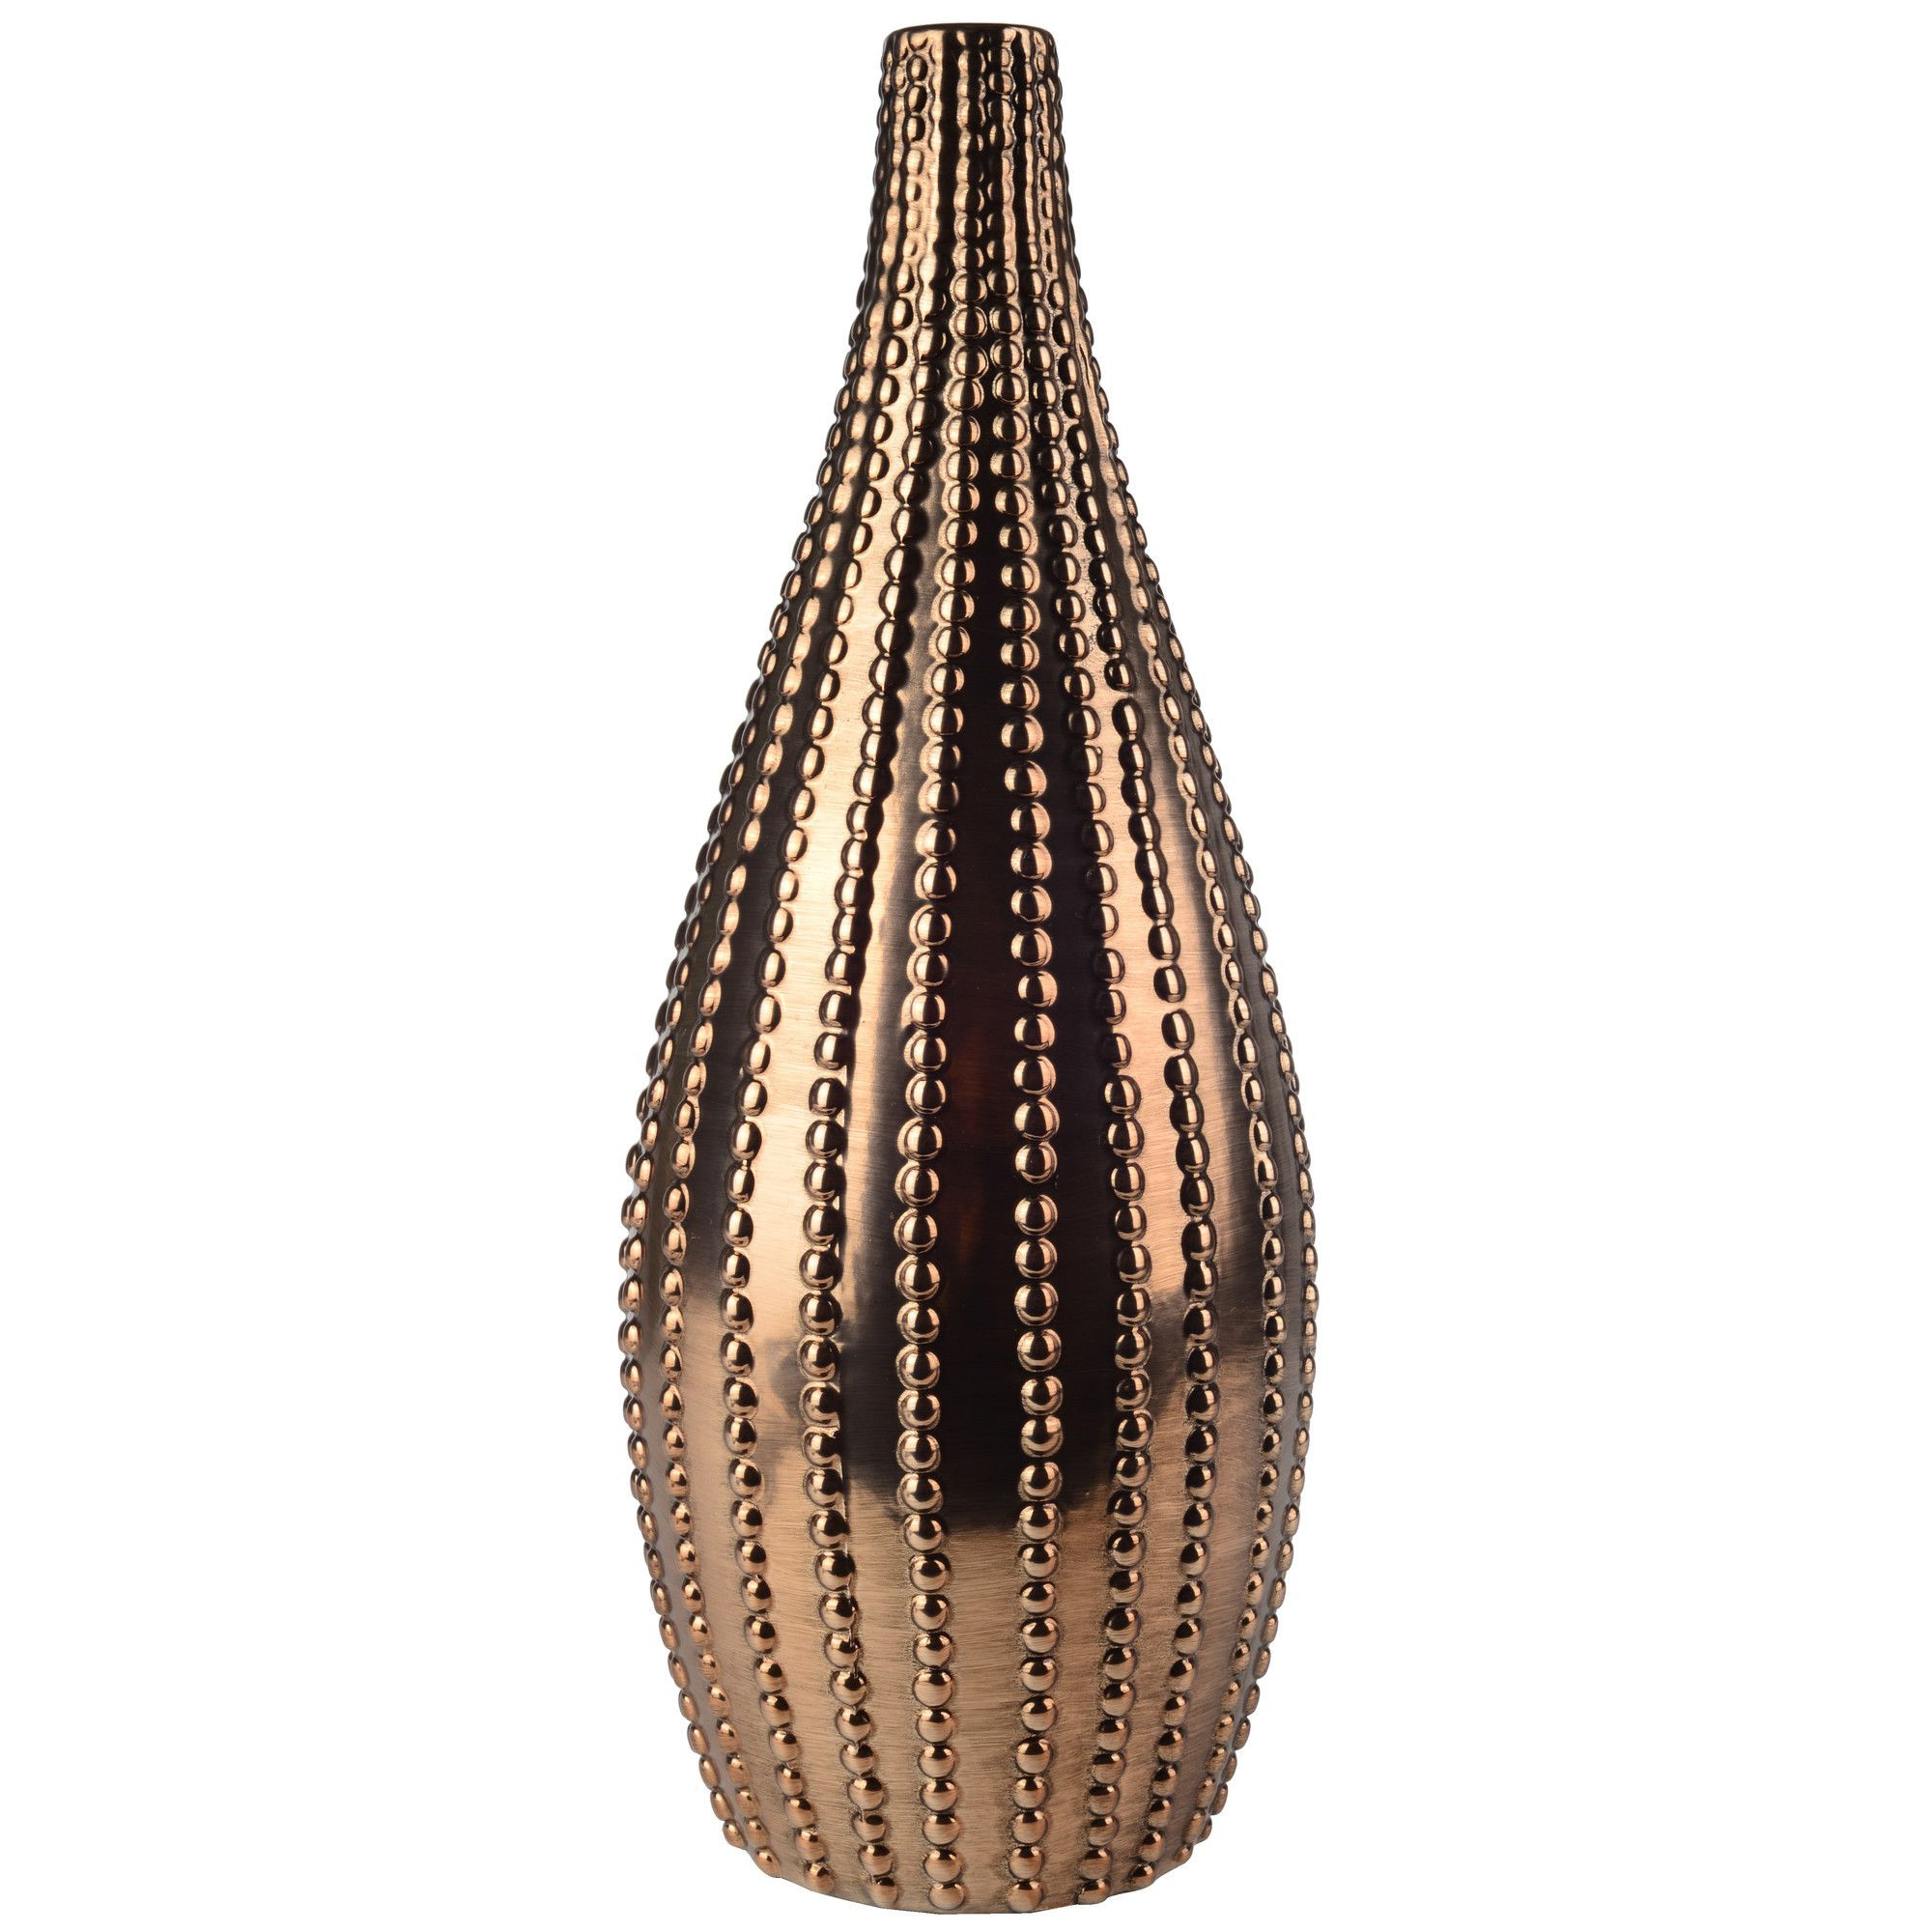 Gold Glitter Vase Of Hand Crafted Glossy Gold Vase Products Pinterest Gold Vases with Hand Crafted Glossy Gold Vase